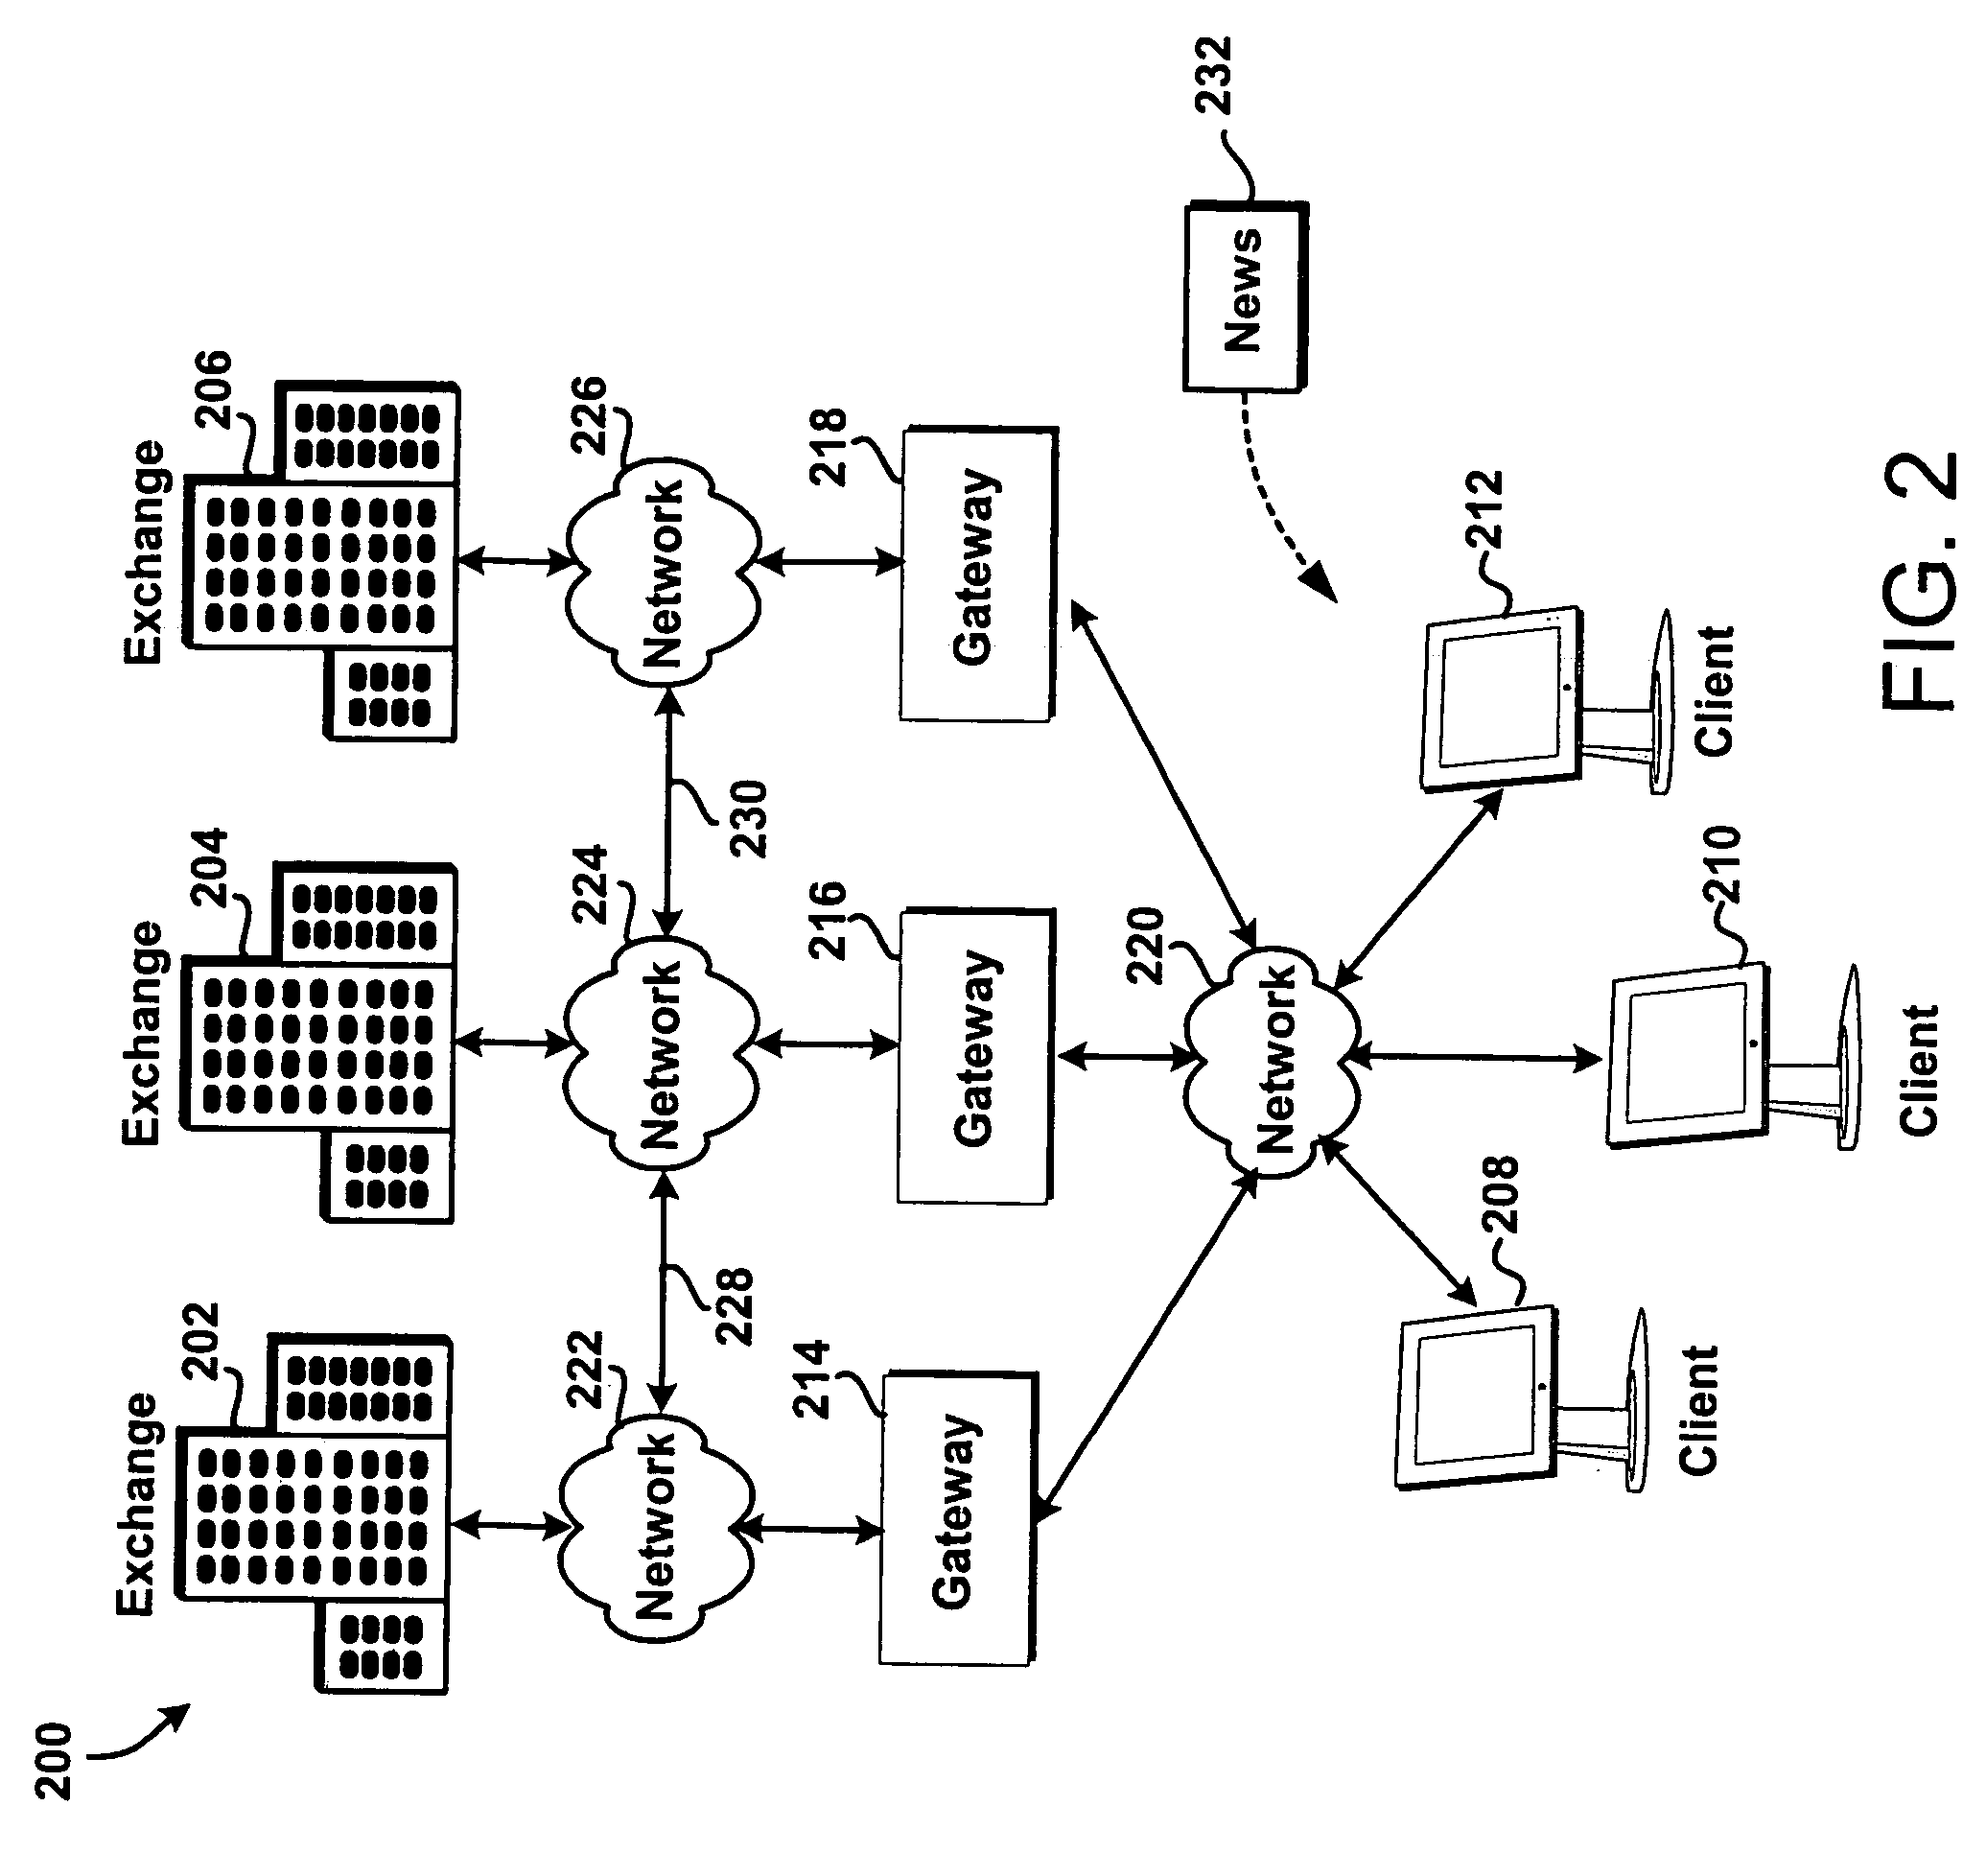 System and method for improved electronic trading